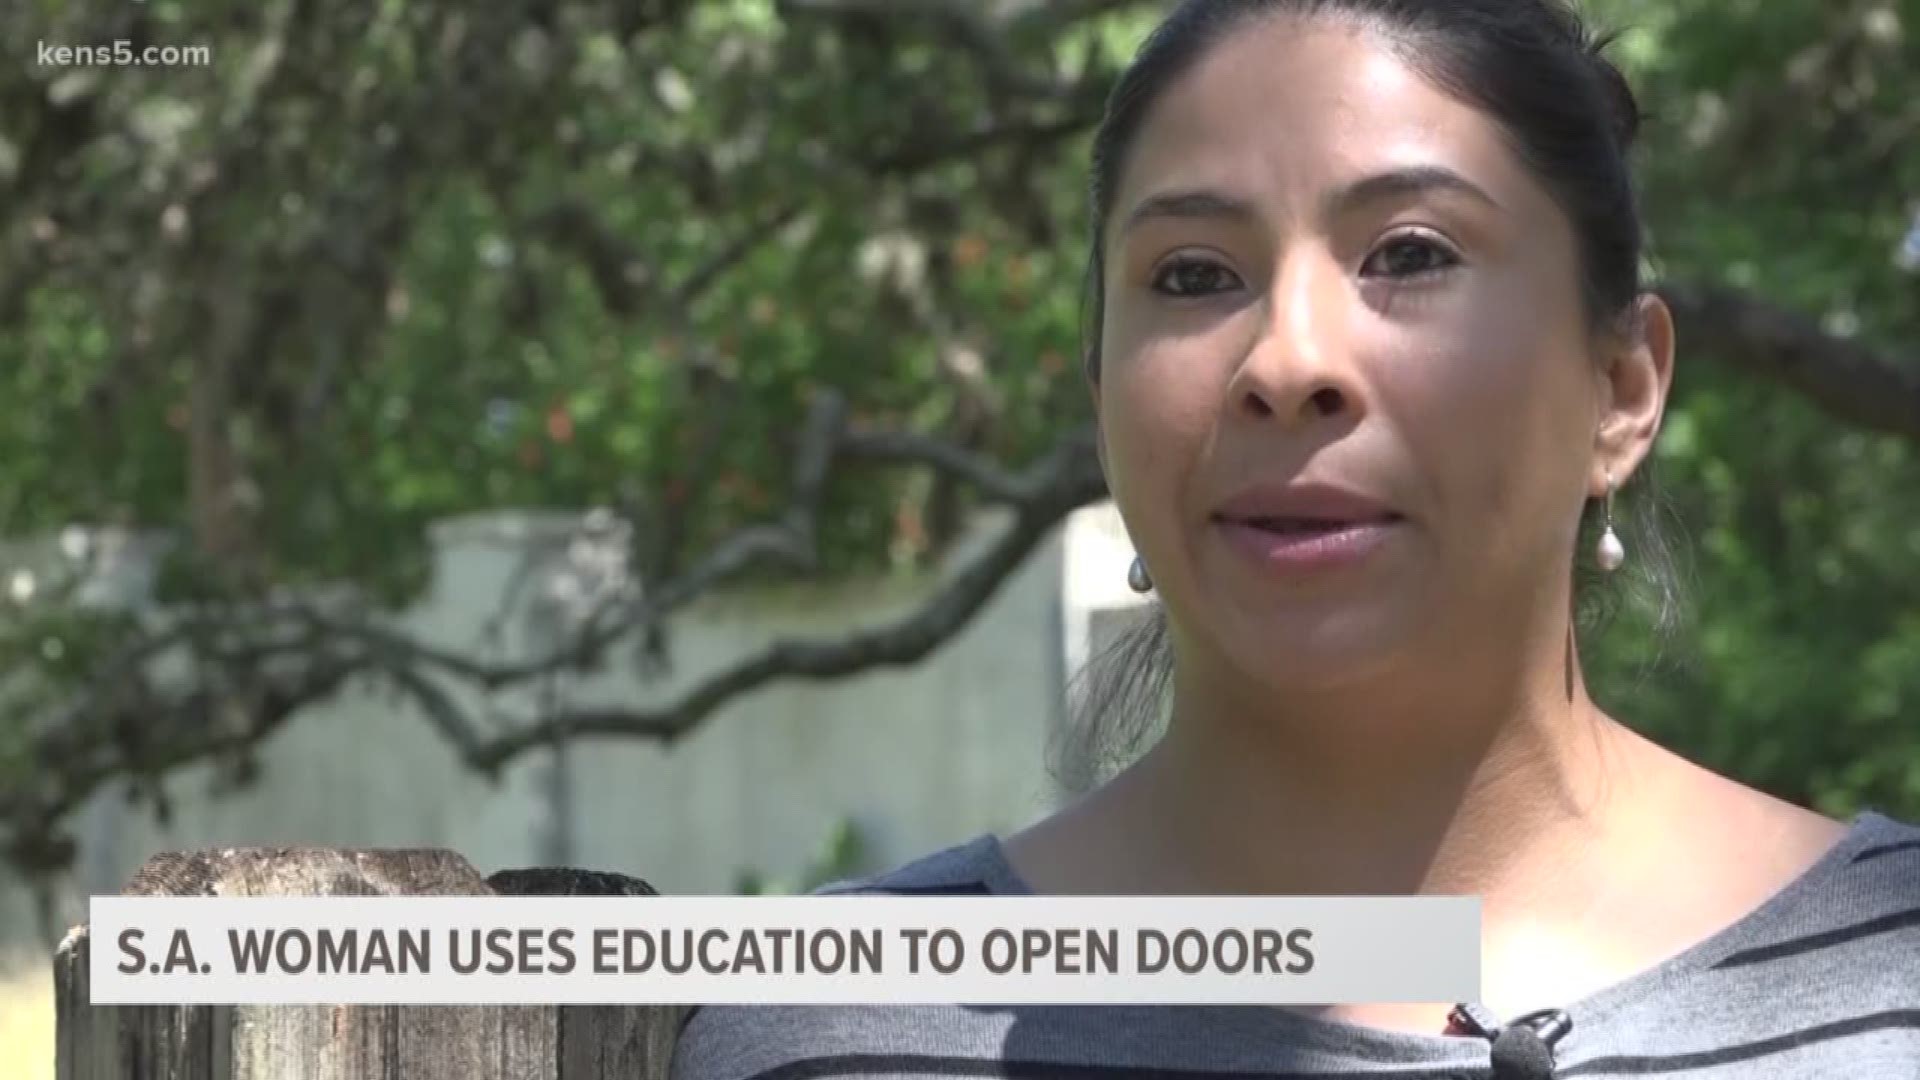 Students are preparing to graduate this spring, and Savannah Louie met a young woman determined to use education to open doors after a traumatizing childhood.